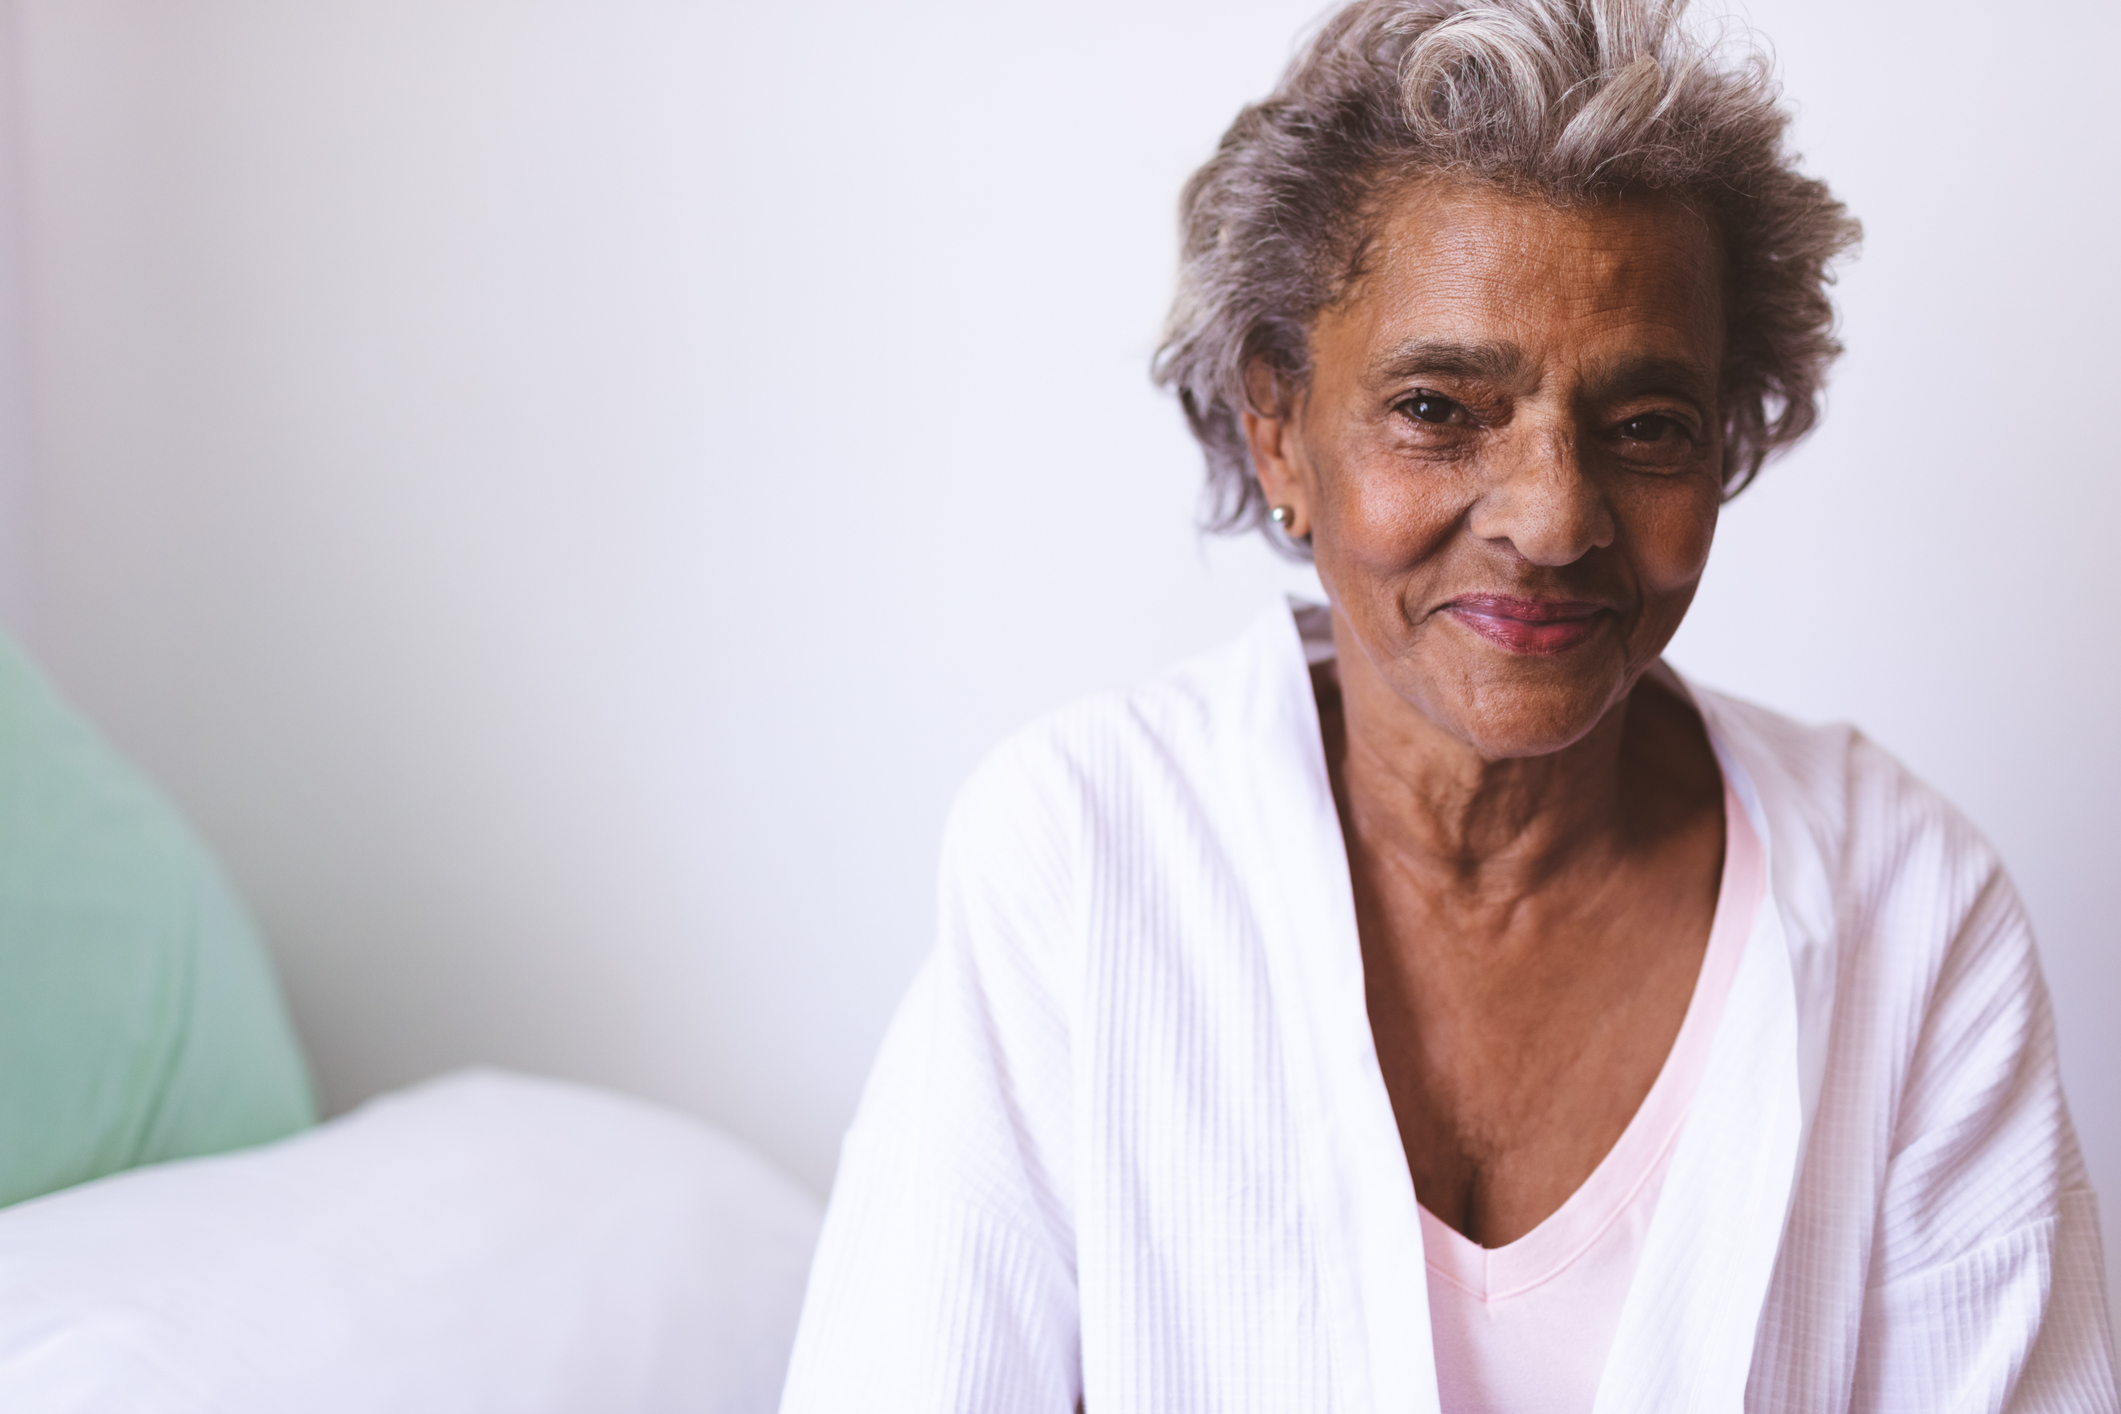 Providing Age-Friendly Care to Address Health Equity